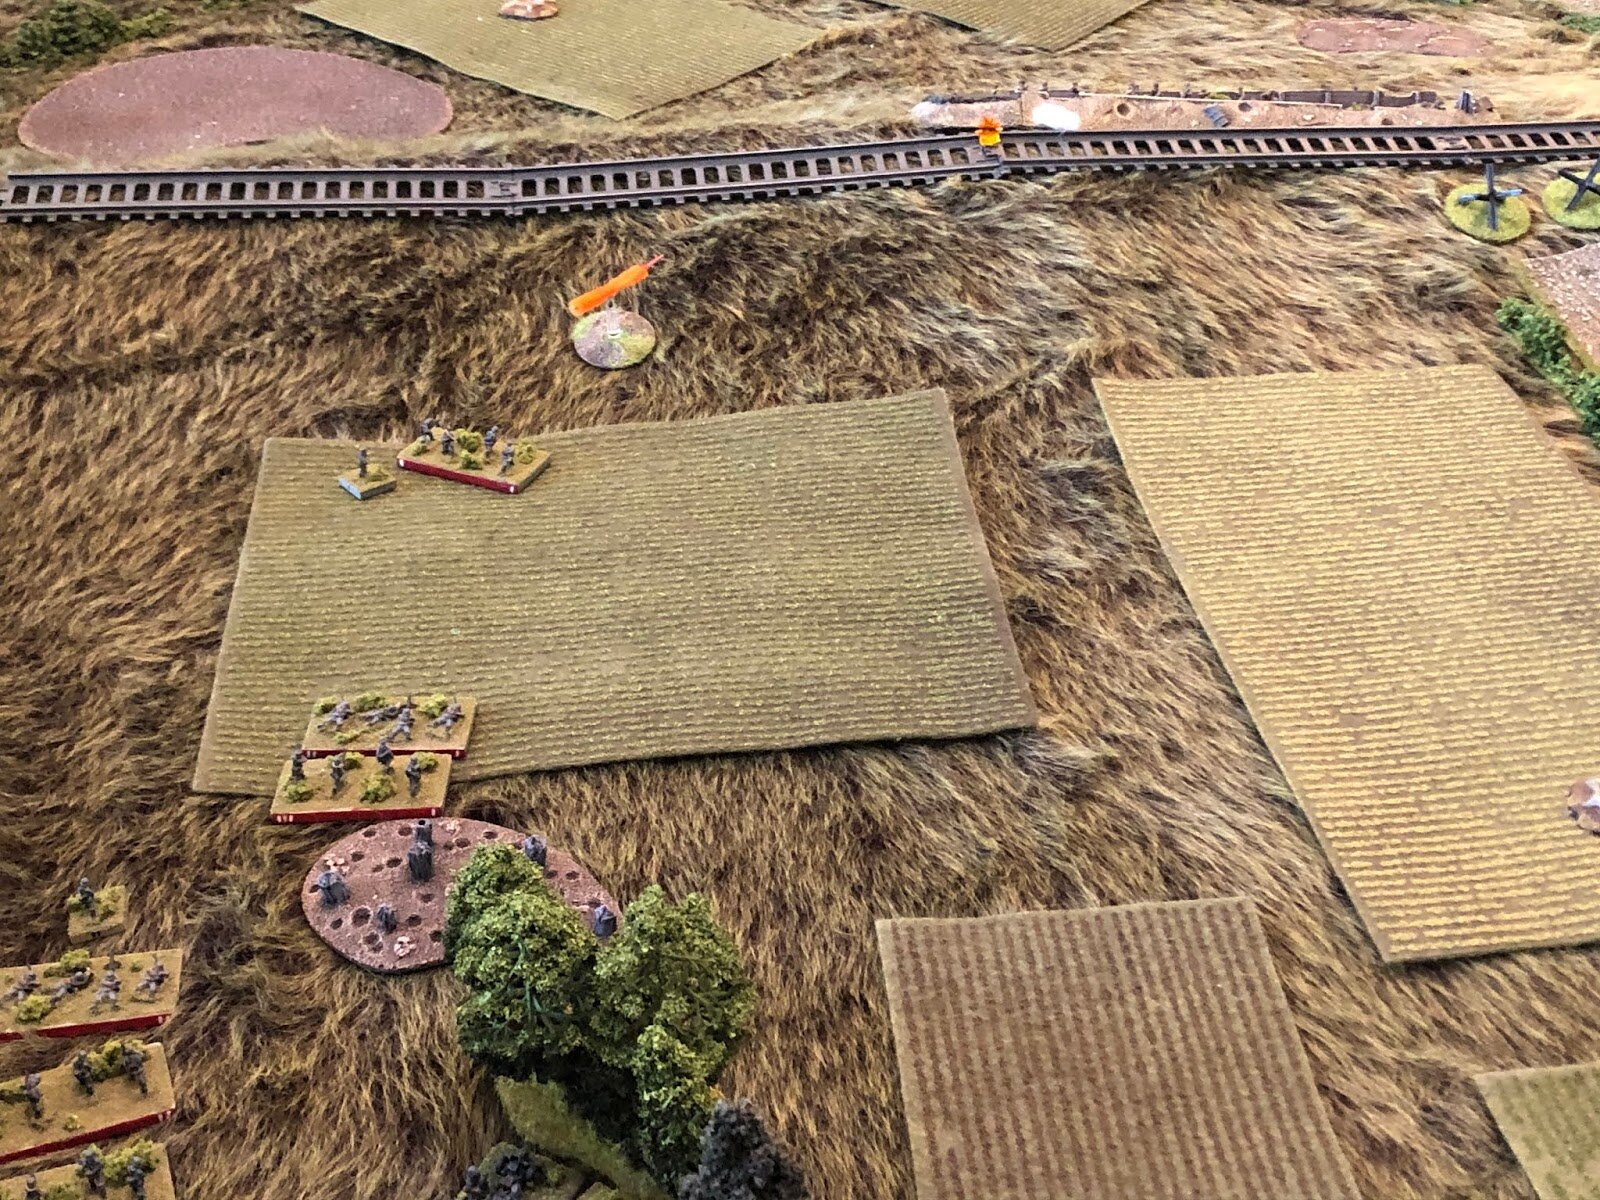  On the German left, 2nd Platoon, 2nd Company gets moving, with their Platoon Commander grabbing his 1st Squad (left top) and pushing them forward, where they peer up to the lip of the railway embankment.  They spot several helmets and open fire, but